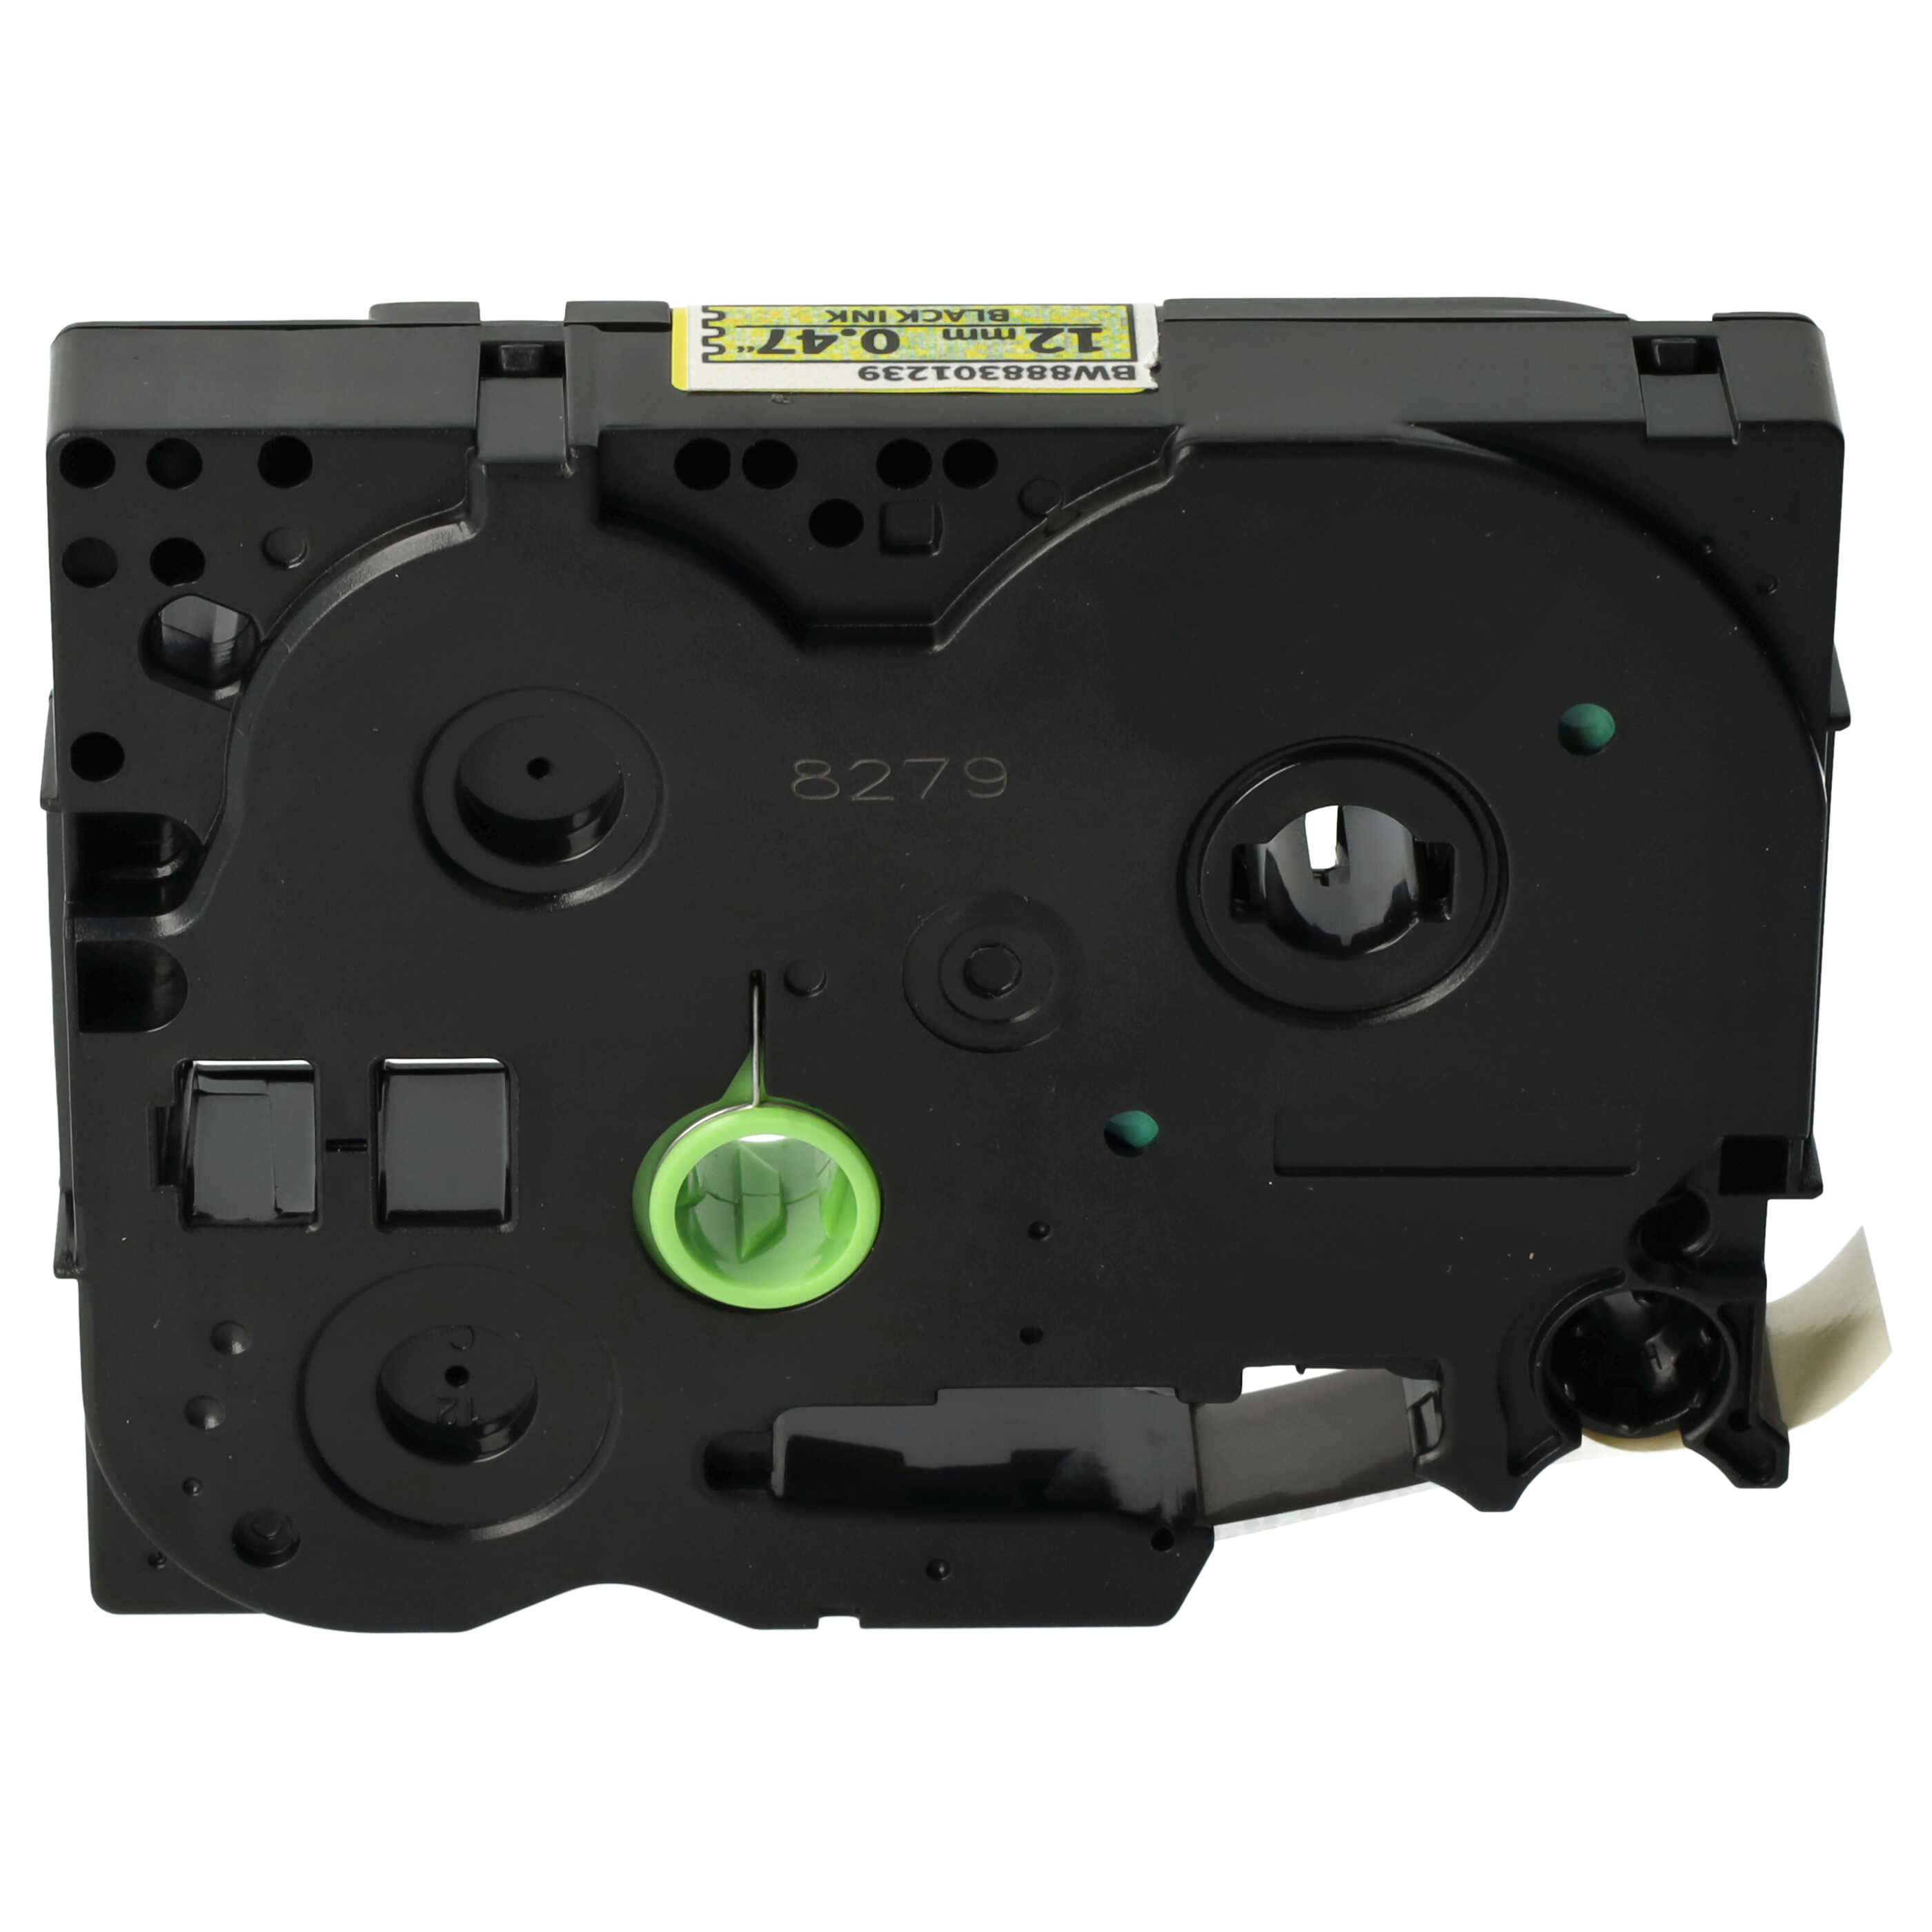 Label Tape as Replacement for Brother TZE-631L1 - 12 mm Black to Yellow (Glitter)